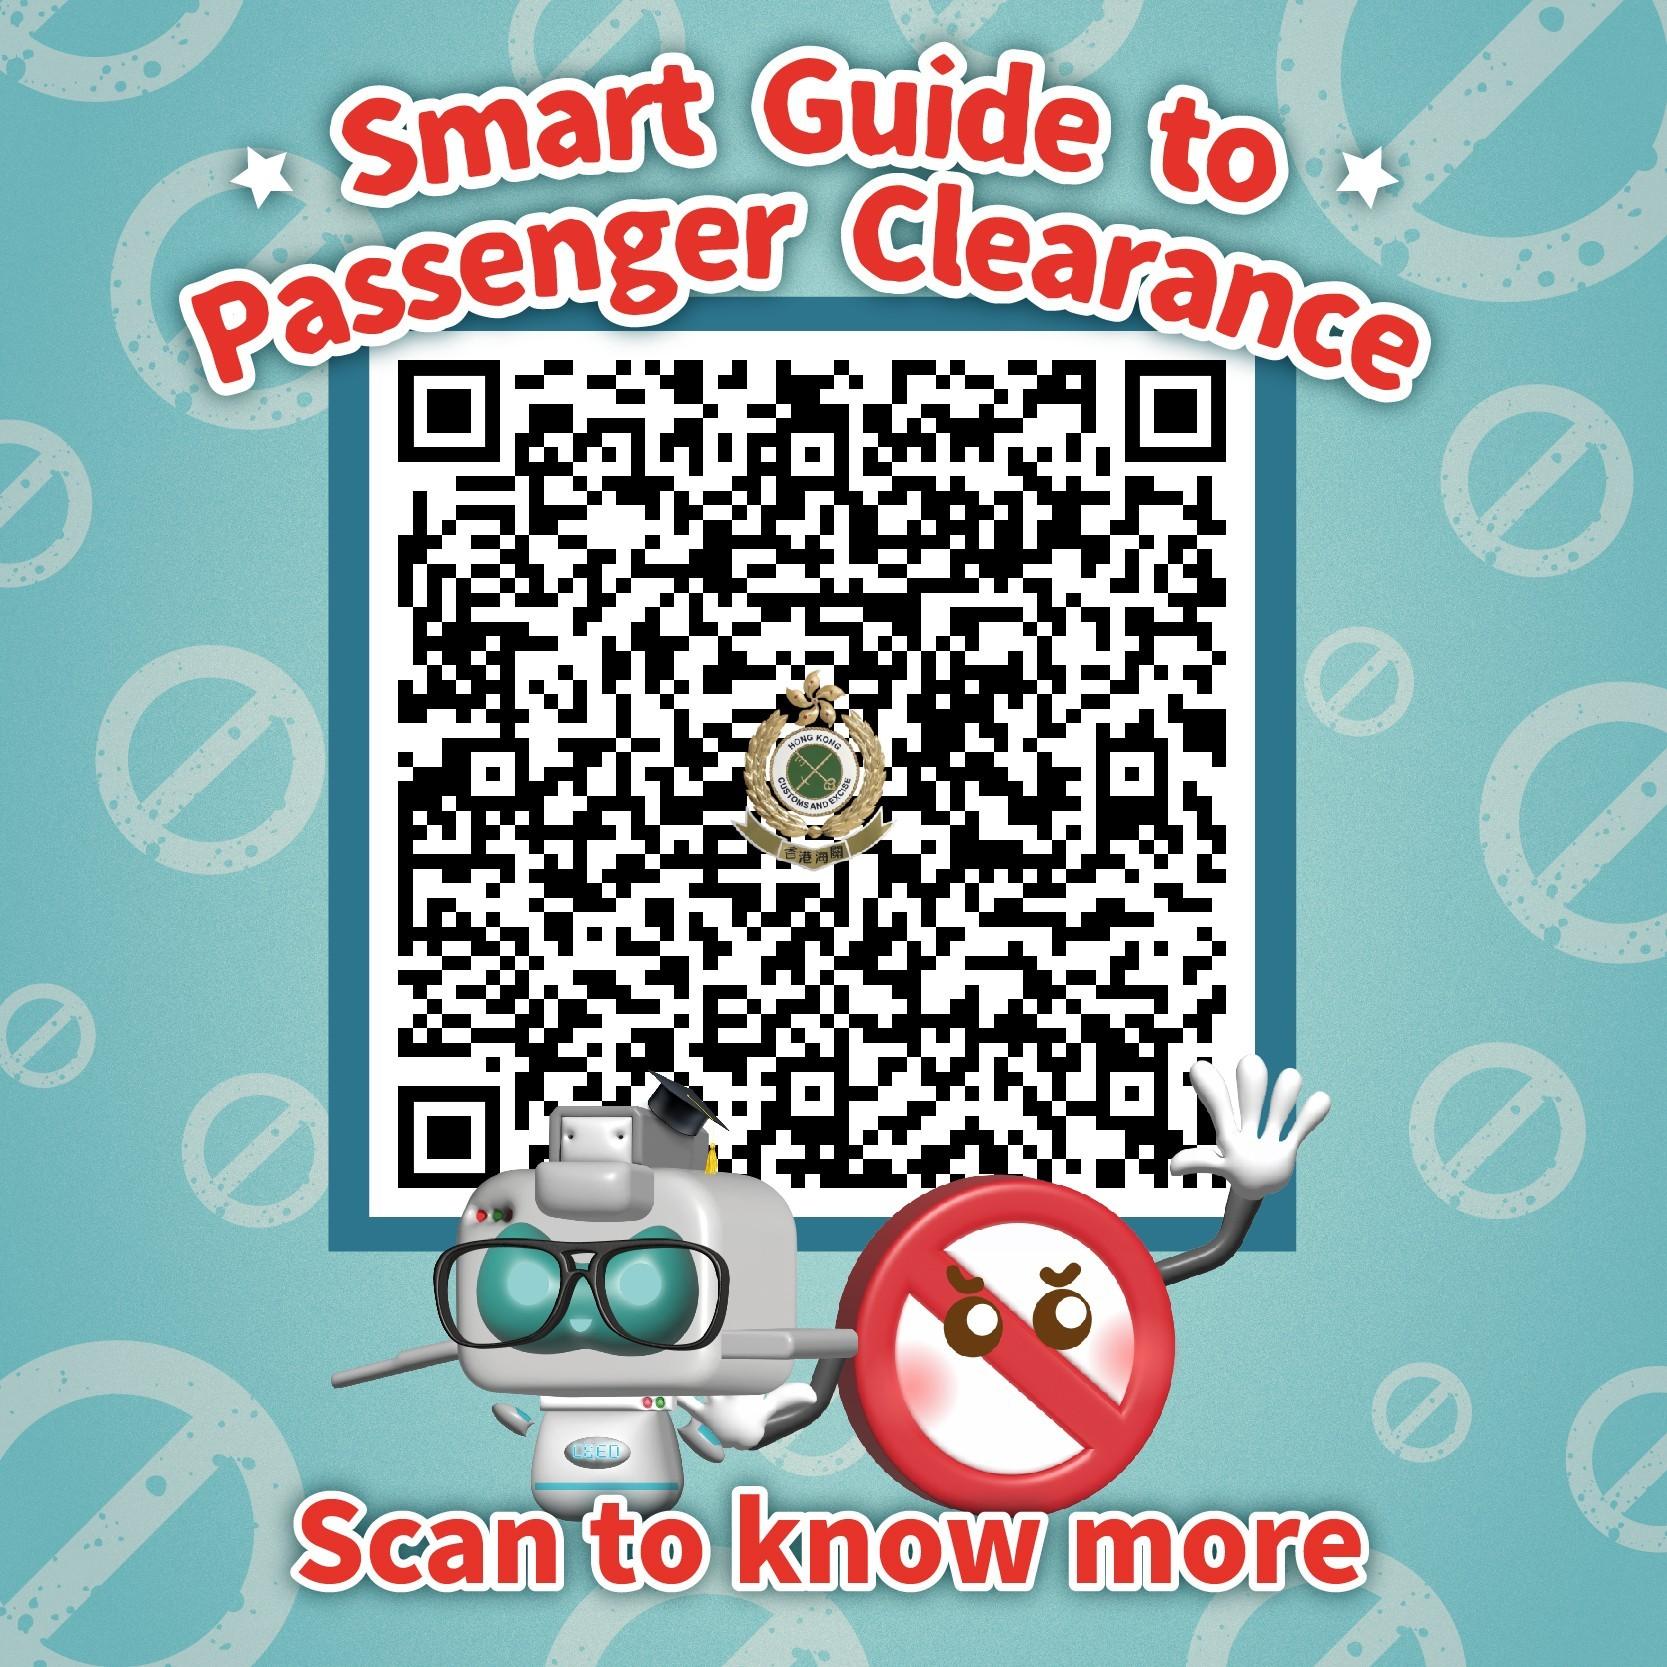 The Customs and Excise Department disseminates the Smart Guide to Passenger Clearance via the social media platform pages and WeChat Official Account to remind members of the public and travellers not to bring prohibited and controlled items into and out of Hong Kong. Photo shows the QR code linking to the guide.